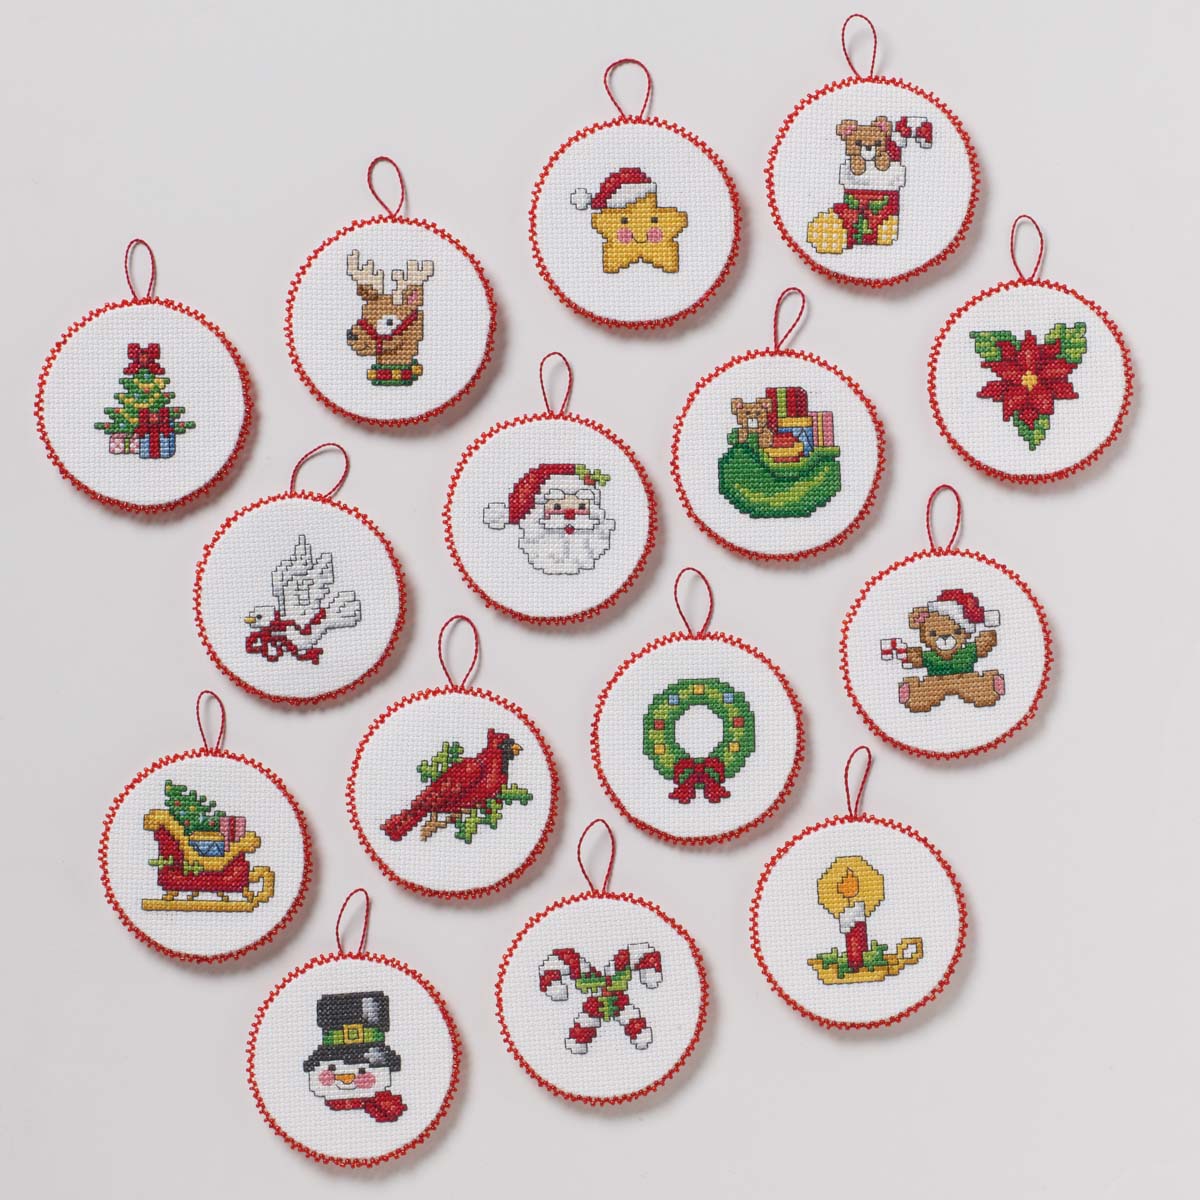 Counted/Stamped)(Harry - Potter)Full Embroidery DIY Cross Stitch Talented  Boy Kit Ornaments